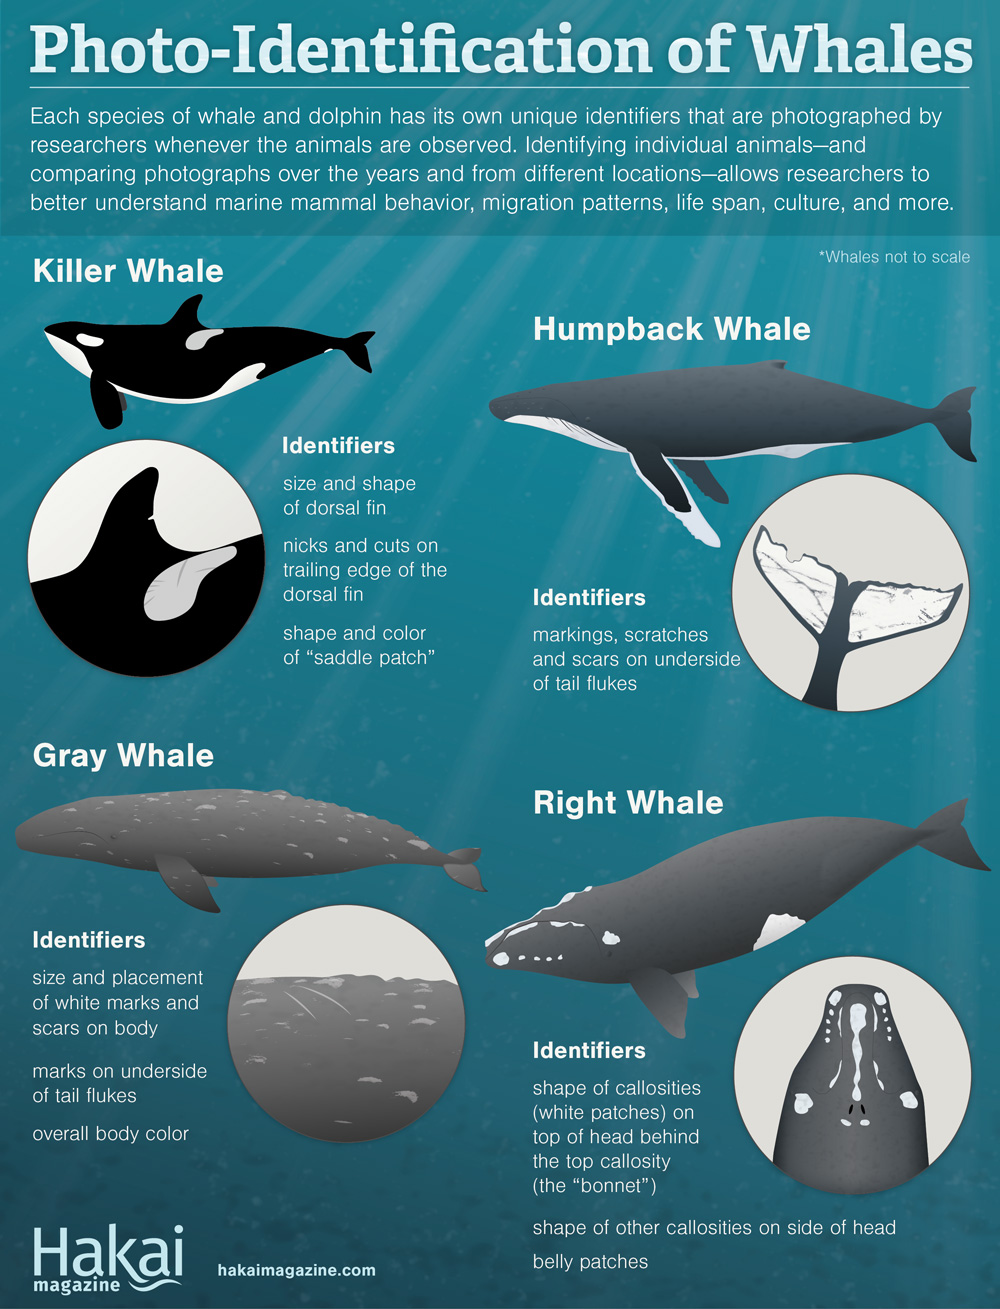 infographic on the photo-identification of whales